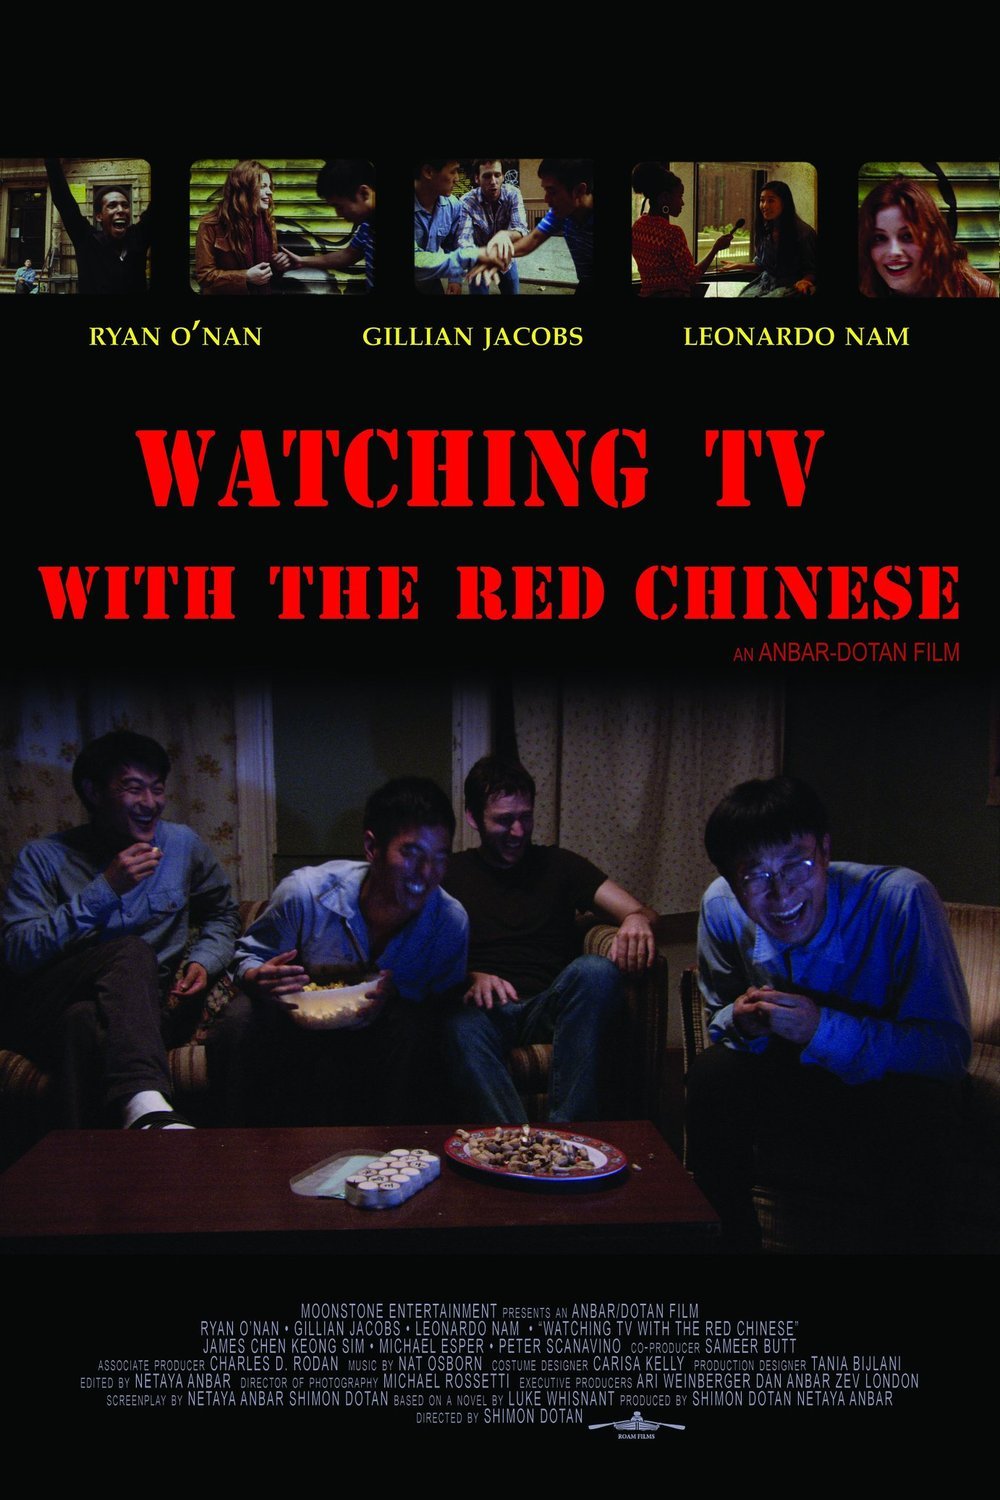 L'affiche du film Watching TV with the Red Chinese